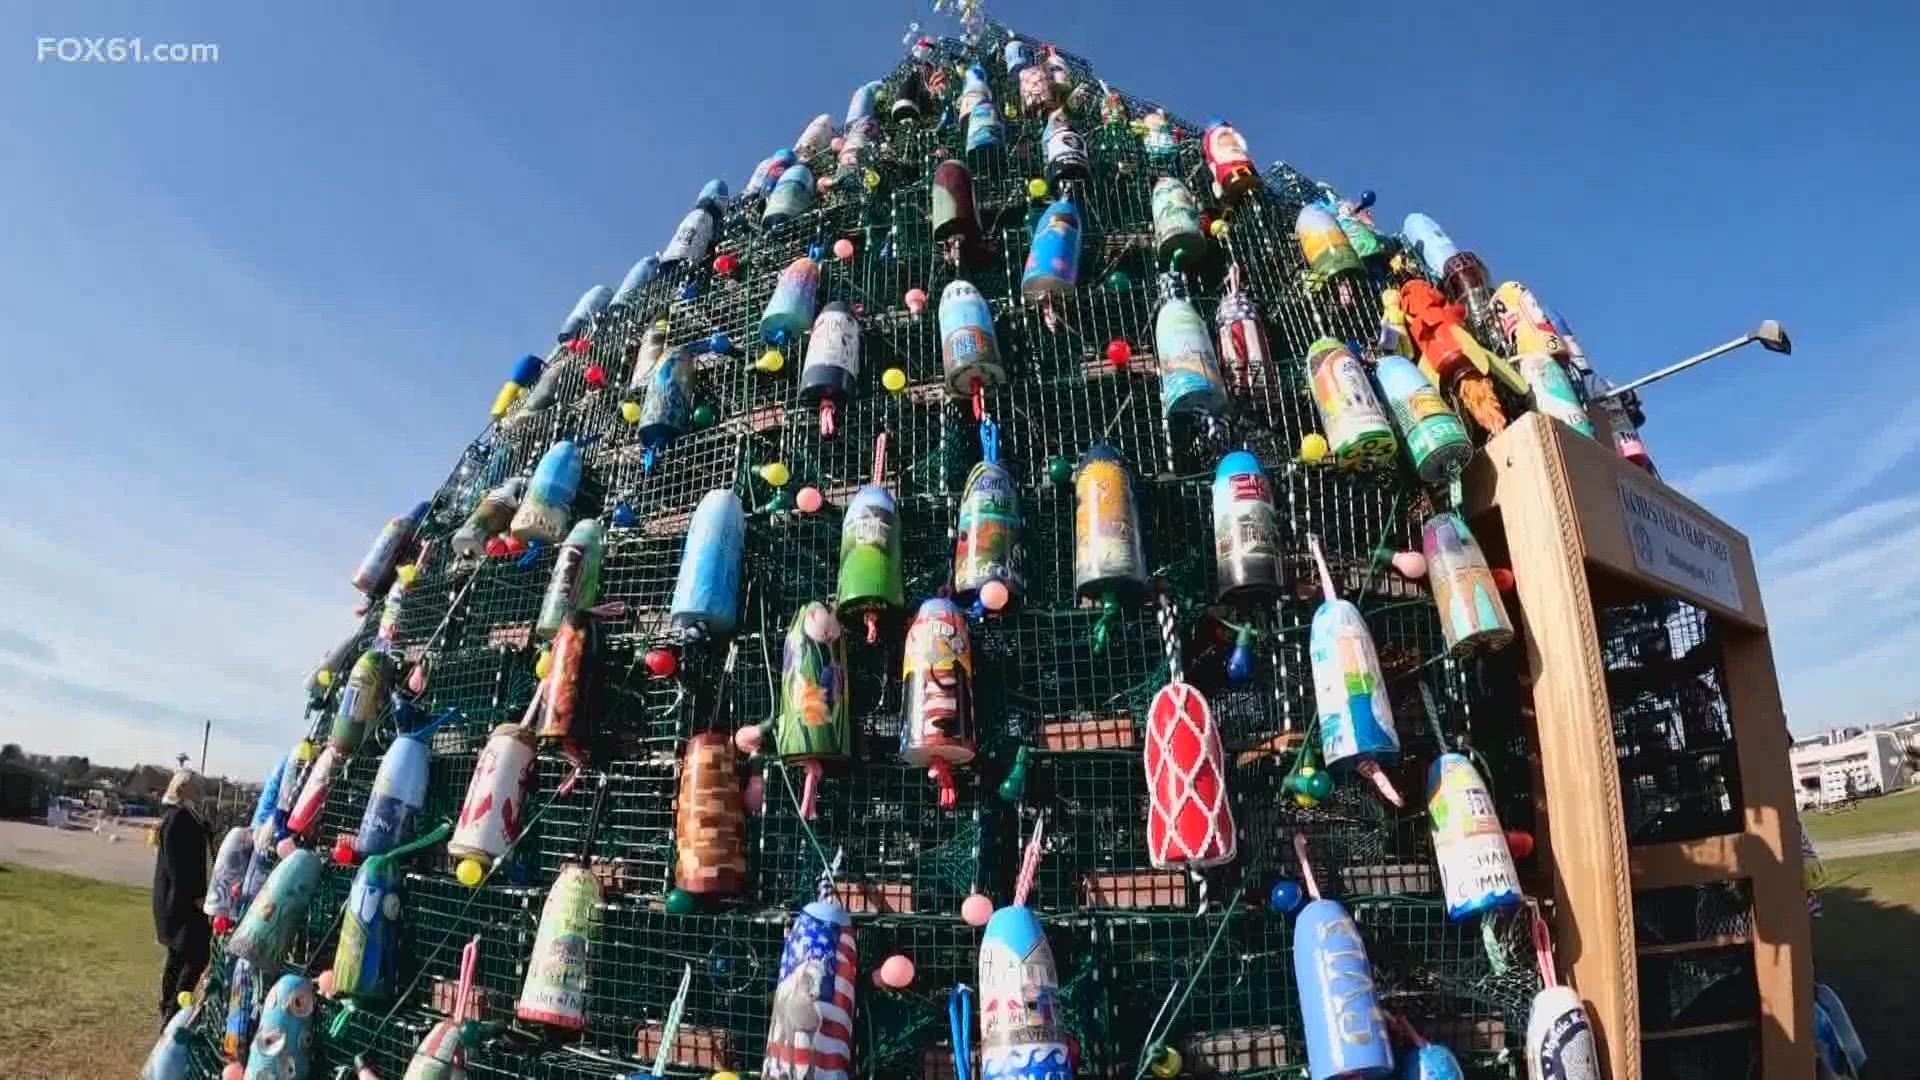 There are 420 lobster traps and 420 buoys that make up the newly acclaimed Lobster Trap Tree.